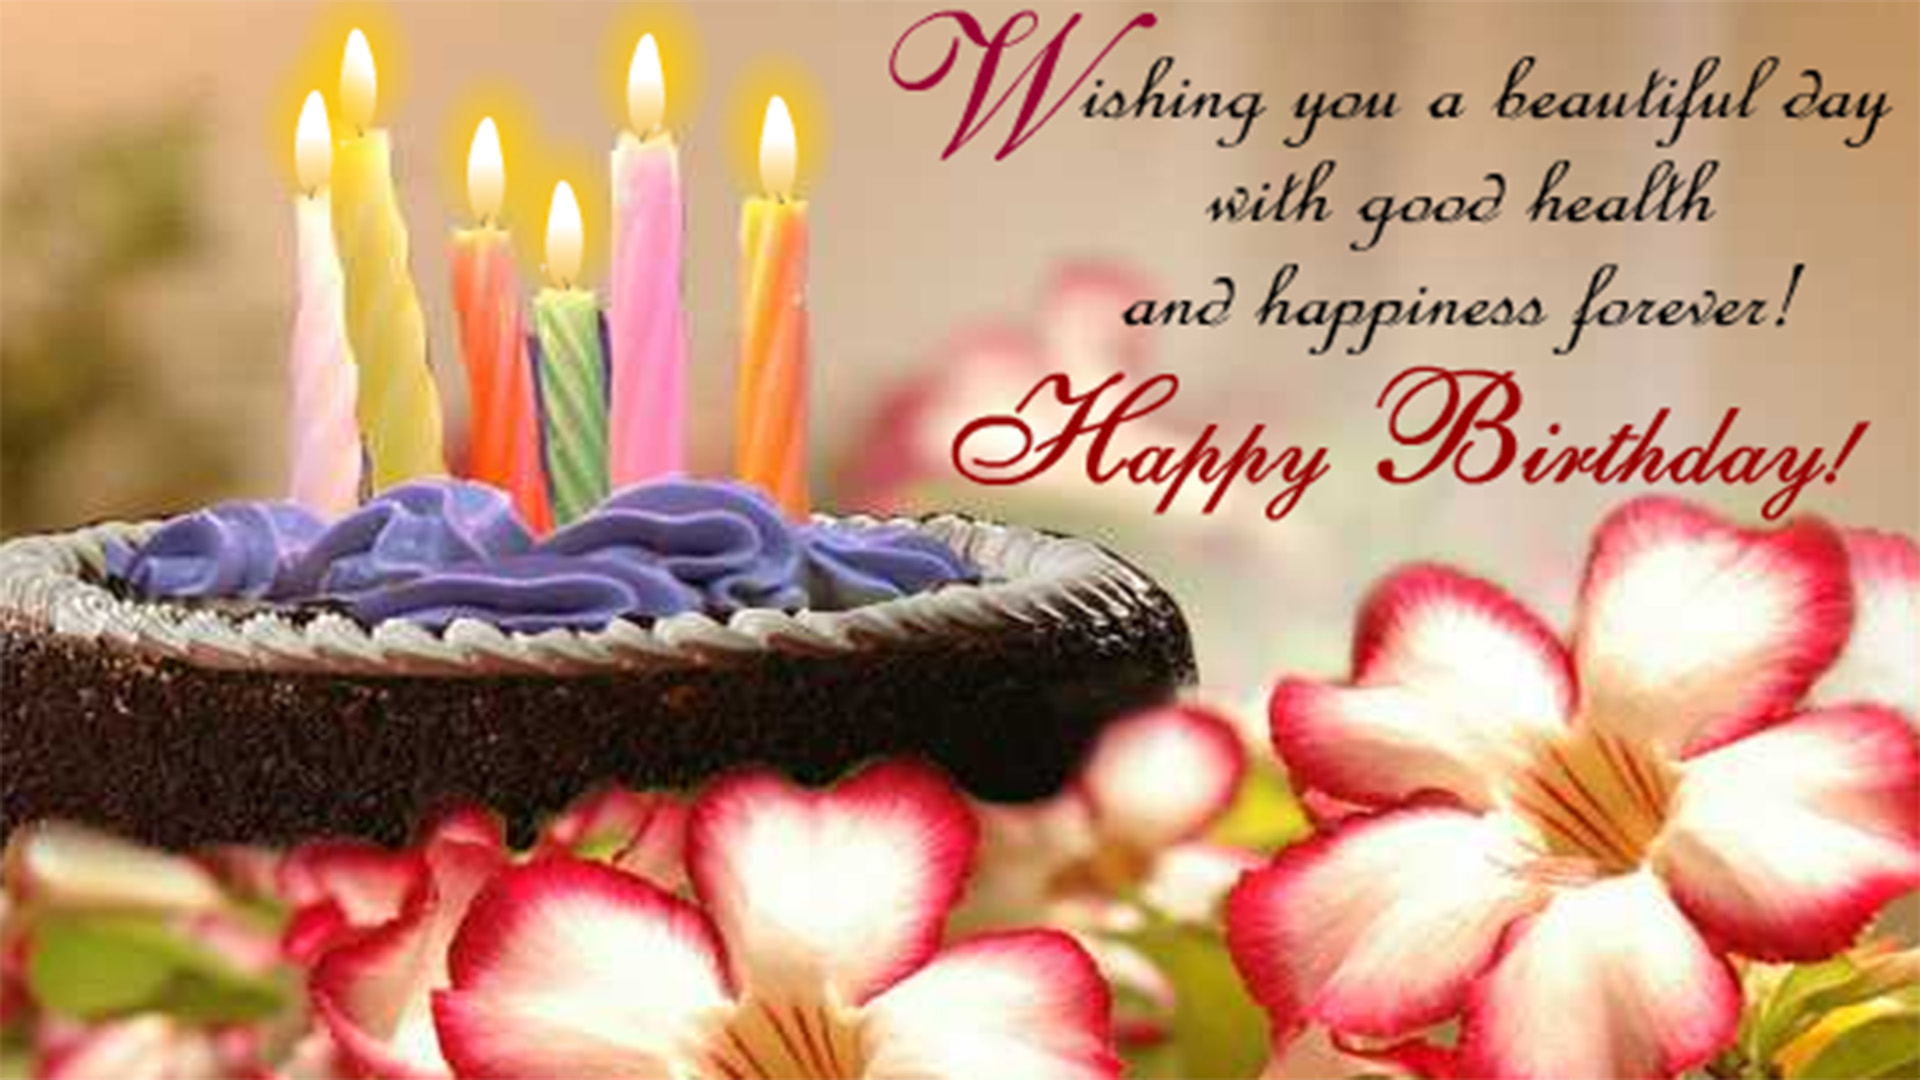 Happy Birthday Wishes HD Images | Birthday Greetings & Messages